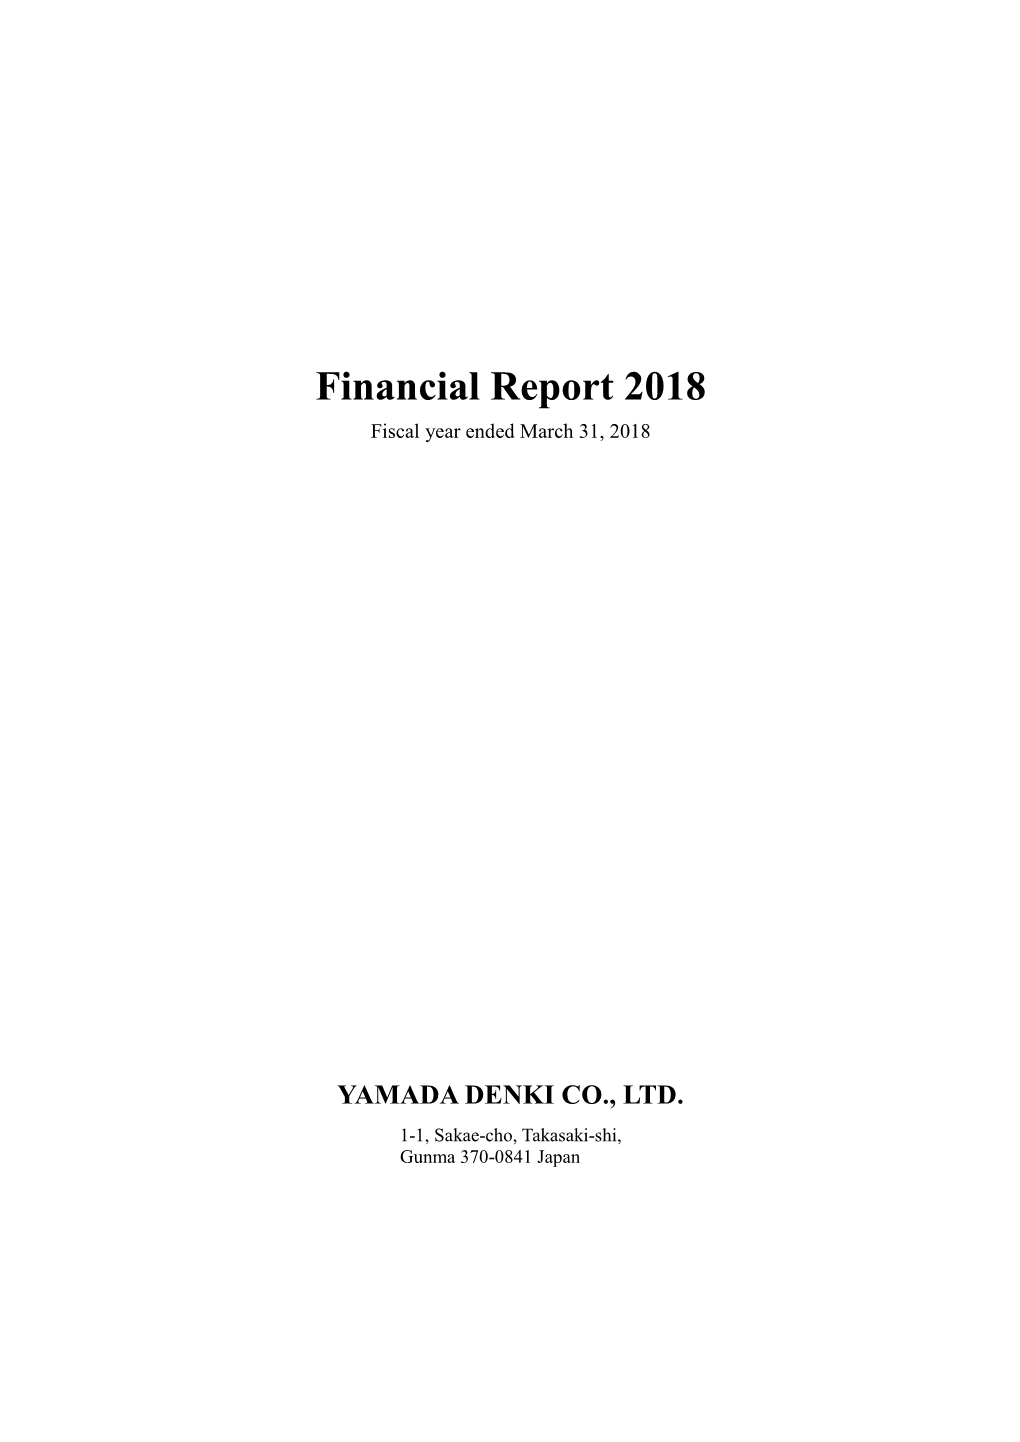 Financial Report 2018 Fiscal Year Ended March 31, 2018